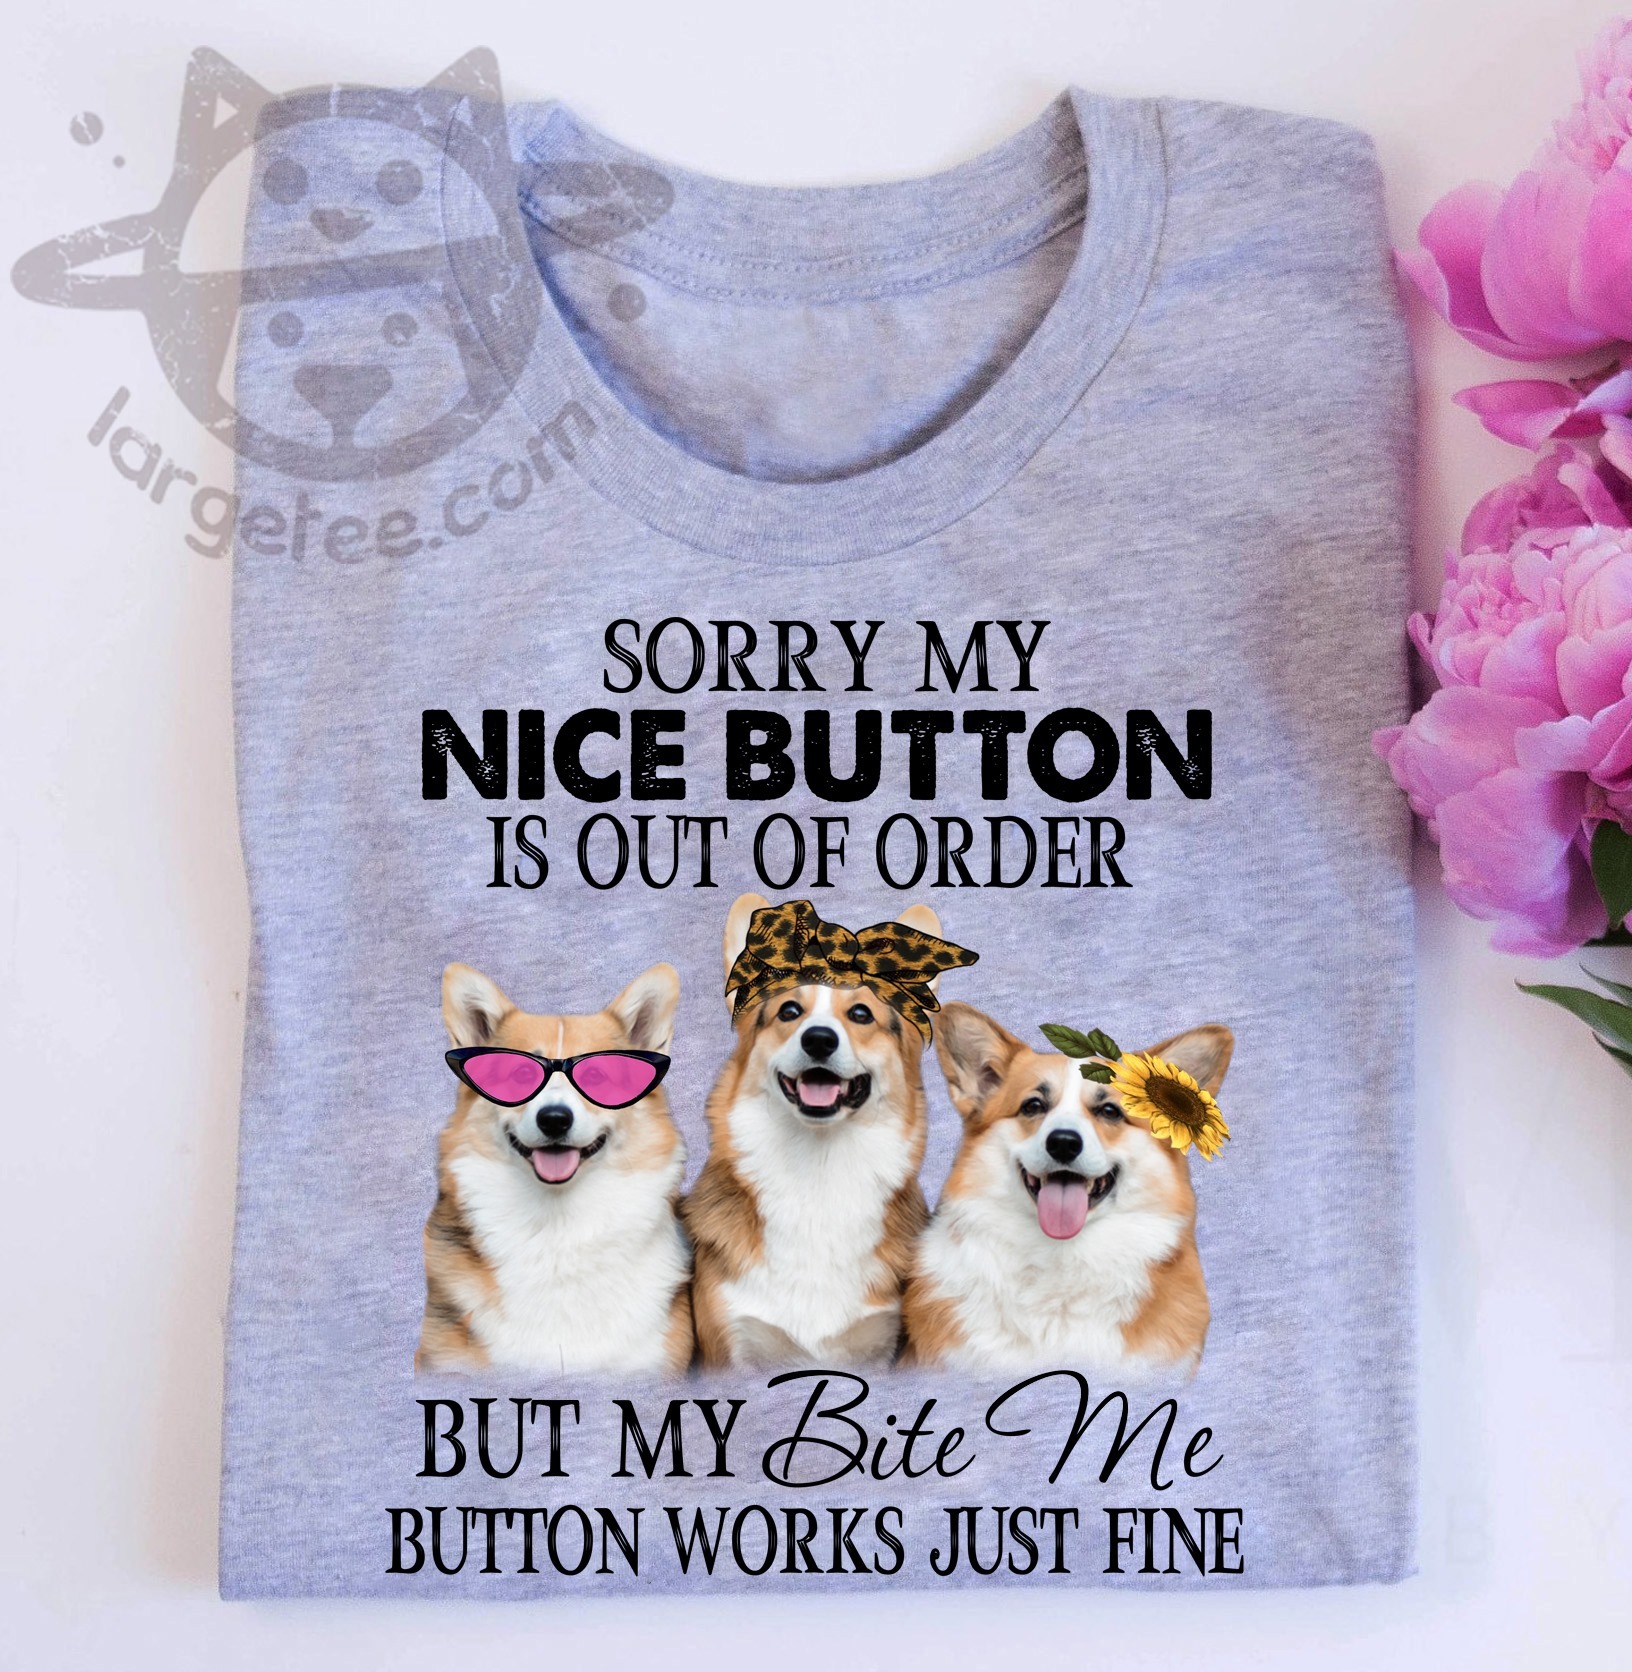 Sorry my nice button is out of order but my bite me button works just fine - Corgi dog